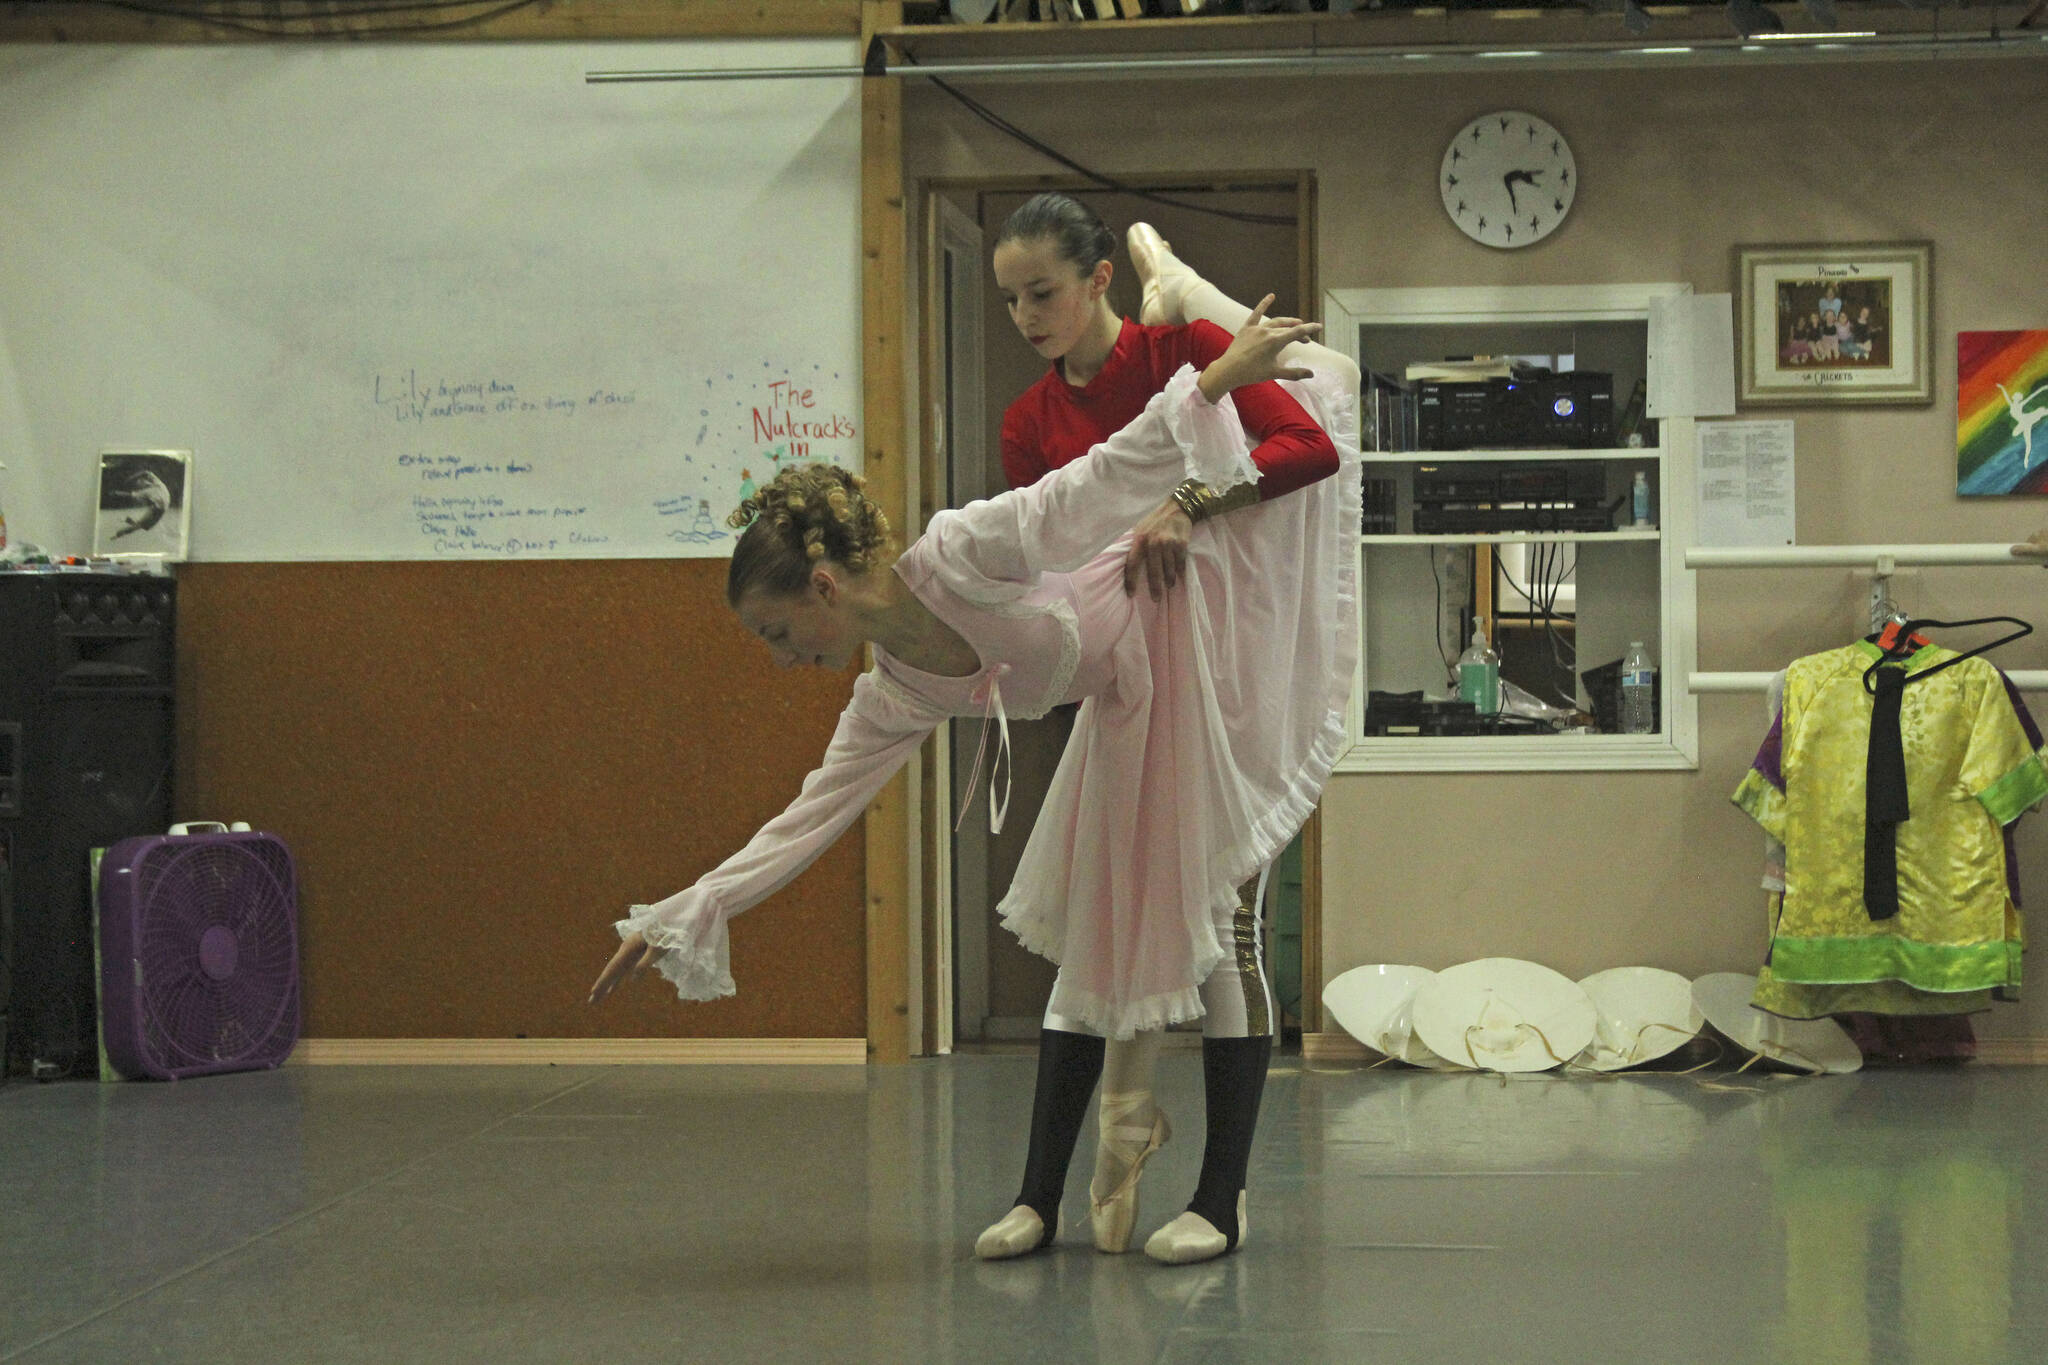 Photo by Karina Andrew/Whidbey News-Times
Tessa Lang dances as Clara with Nutcracker understudy Riley White in class Nov. 22. Dancer Naomi Crawford will play the titular role of the Nutcracker in performances Dec. 10 and 11.